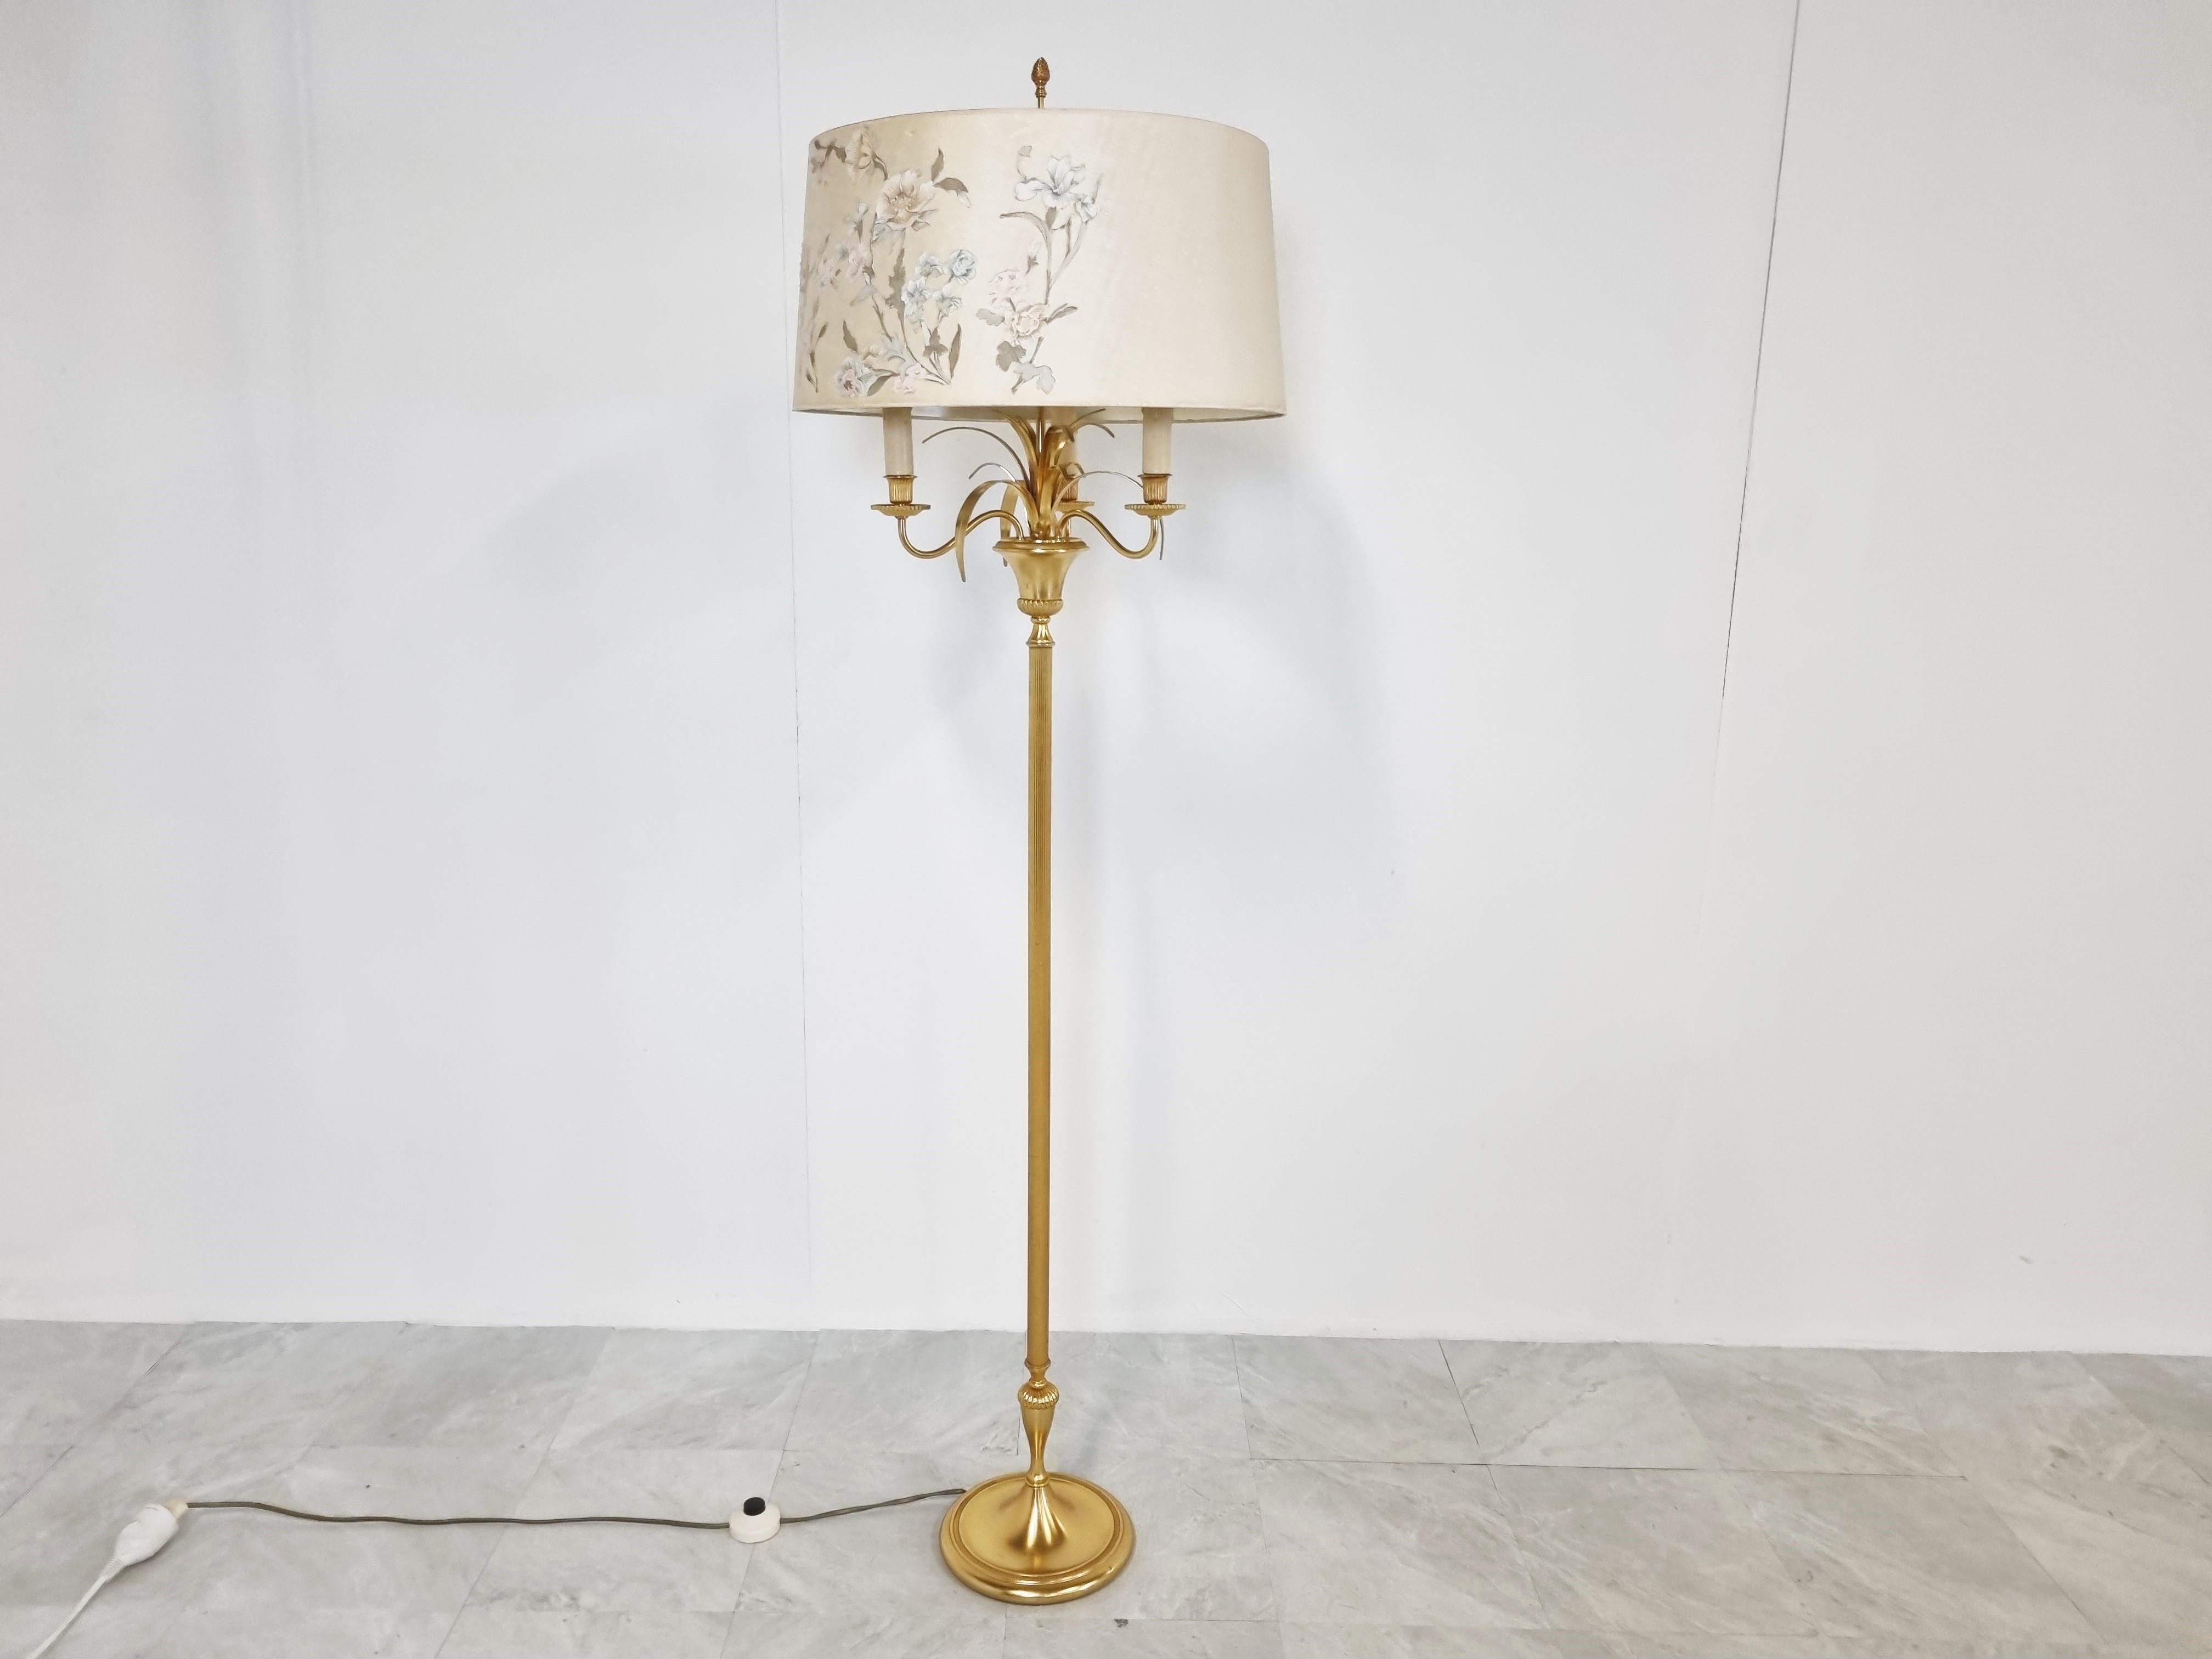 Vintage brass pineapple leaf floor lamp by Boulanger.

Charming natural lamp just like the pineapple leaf table lamps but heere offered in a large floor lamp model.

Good condition.

Tested and ready to use with a regular E26/E27 light